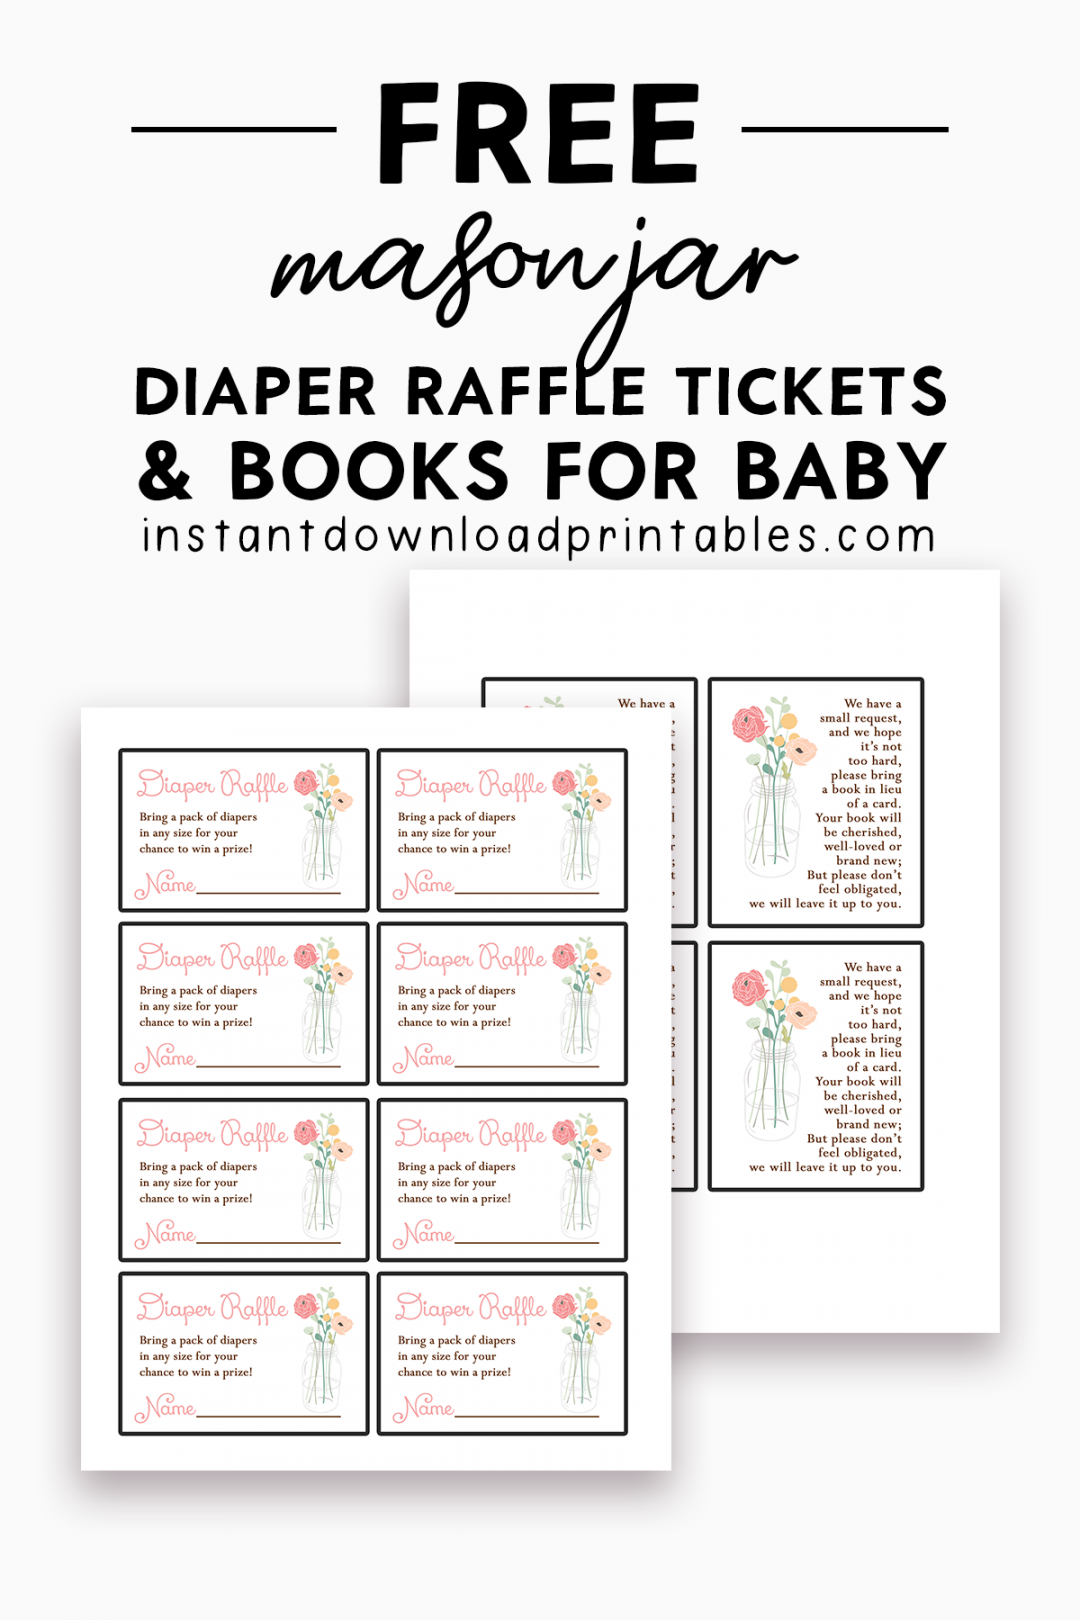 Free Baby Shower Diaper Raffle Tickets and Books for Baby  - FREE Printables - Diaper Raffle Tickets Printable Free